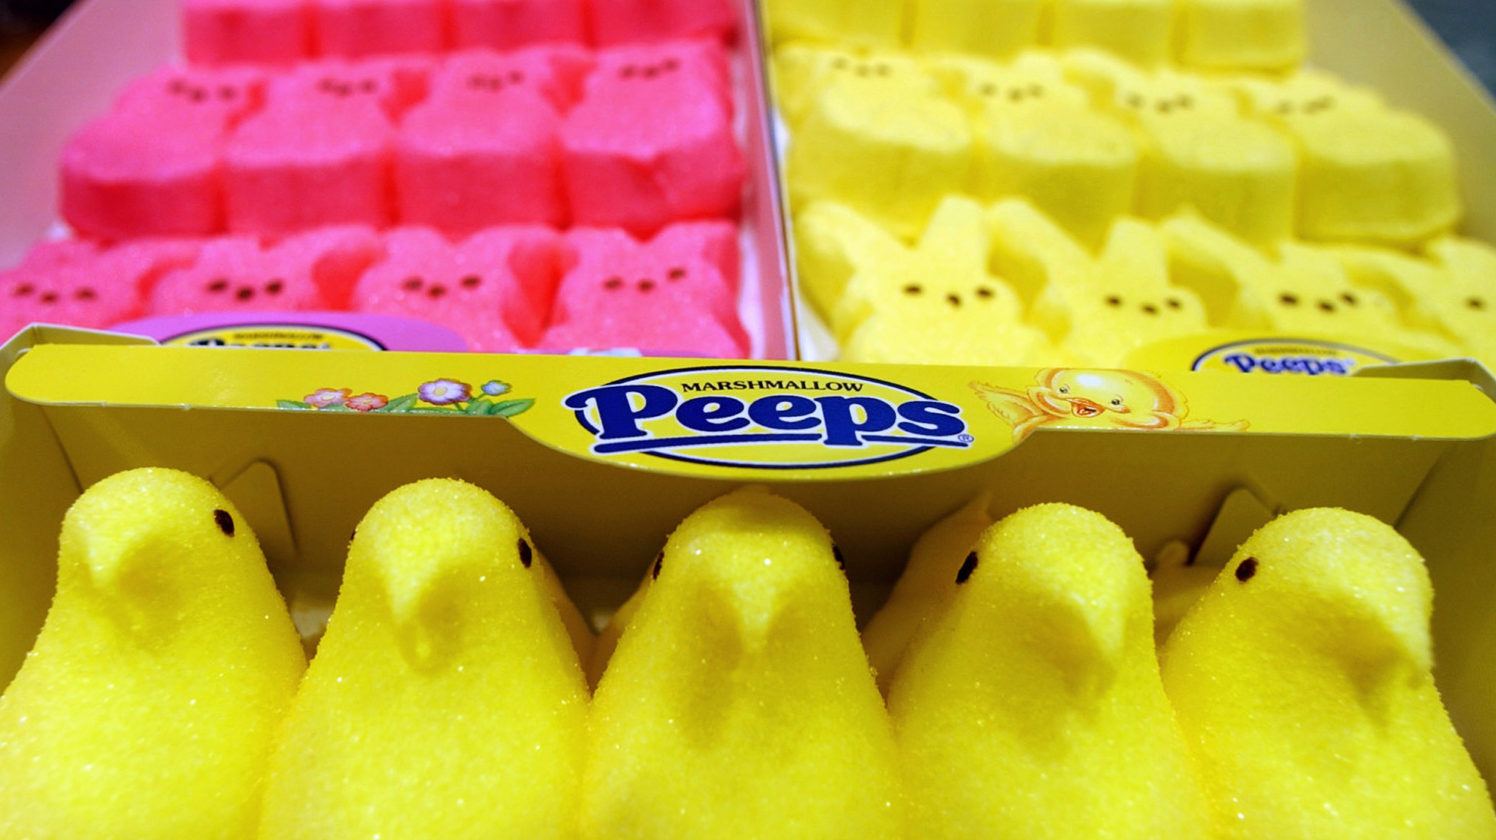 Boxes of Peeps on grocery store shelf.